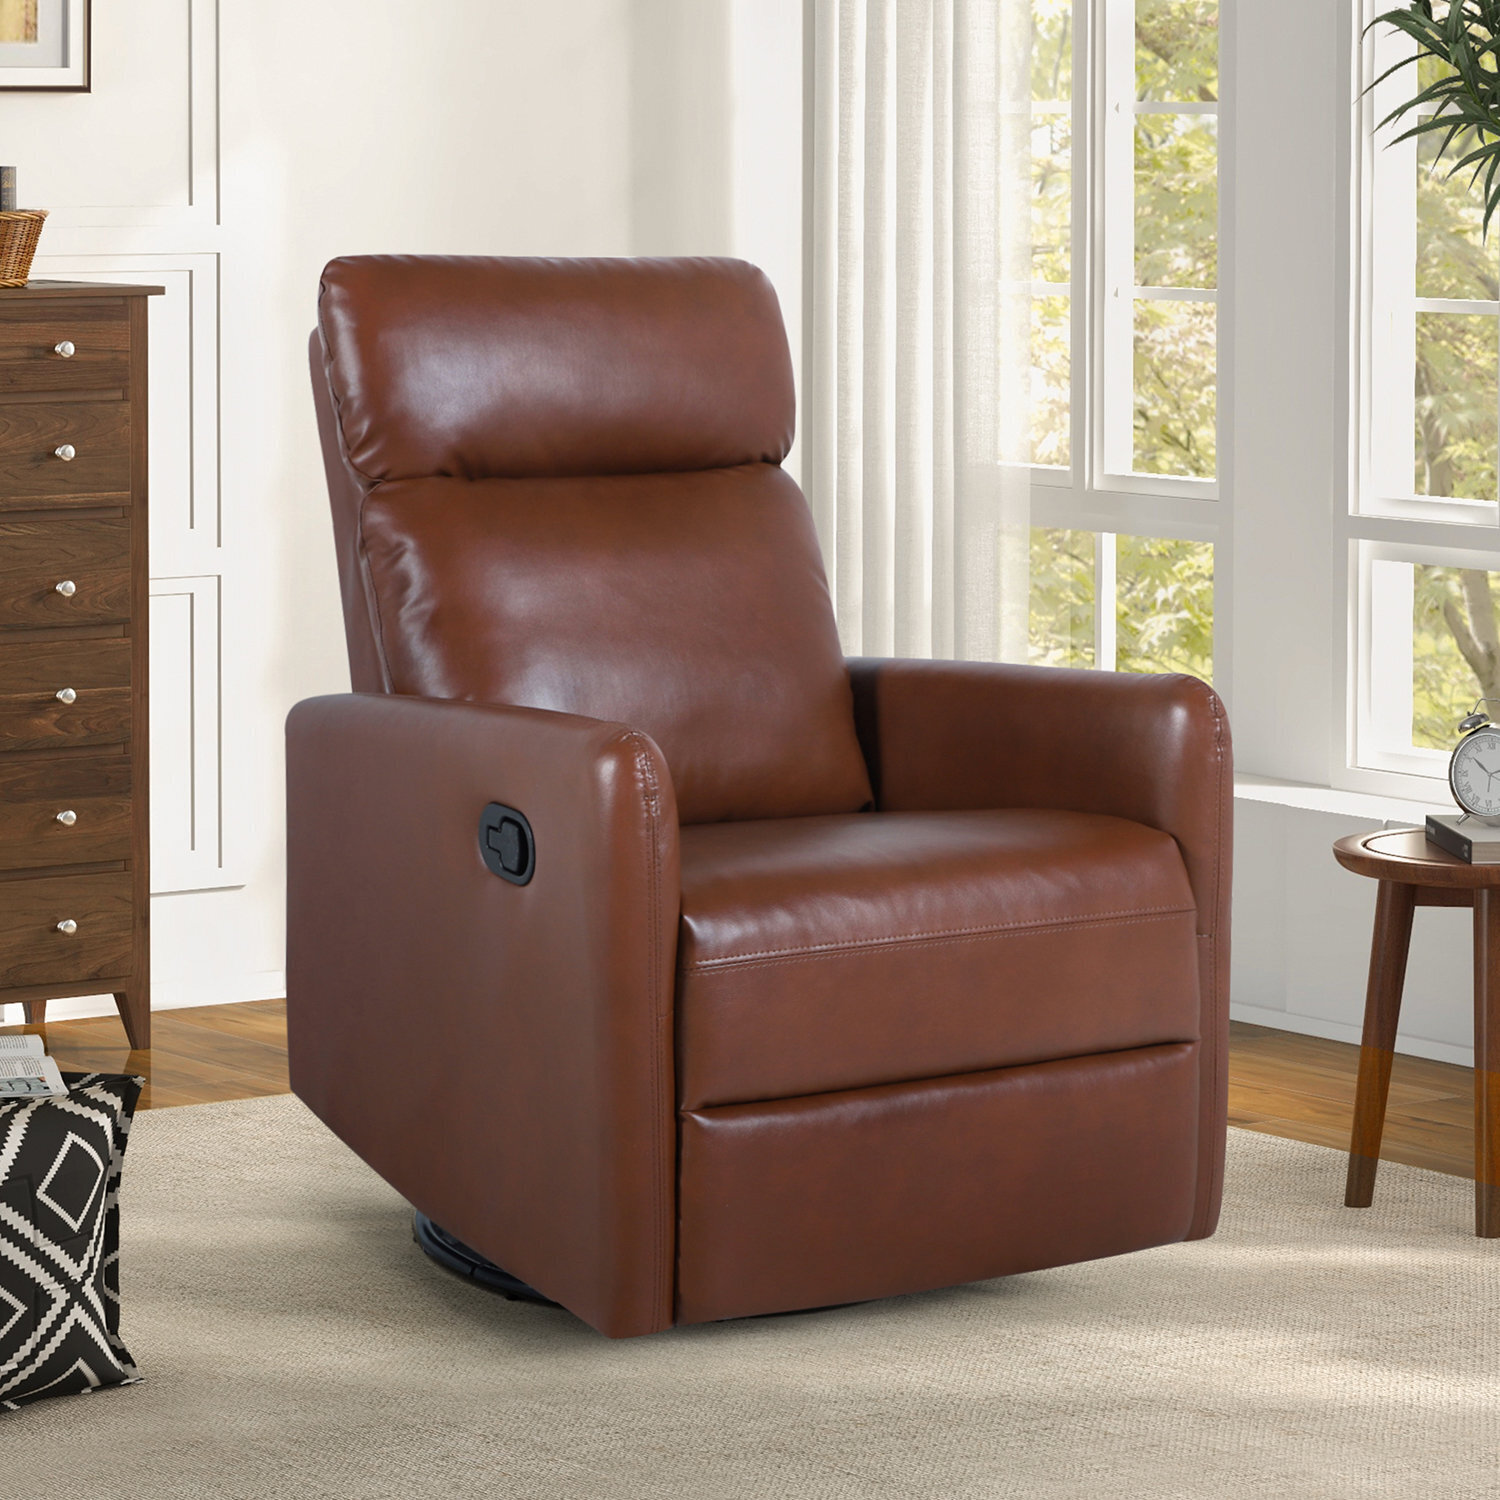 Vegan Leather Small Recliner Swivel Chair